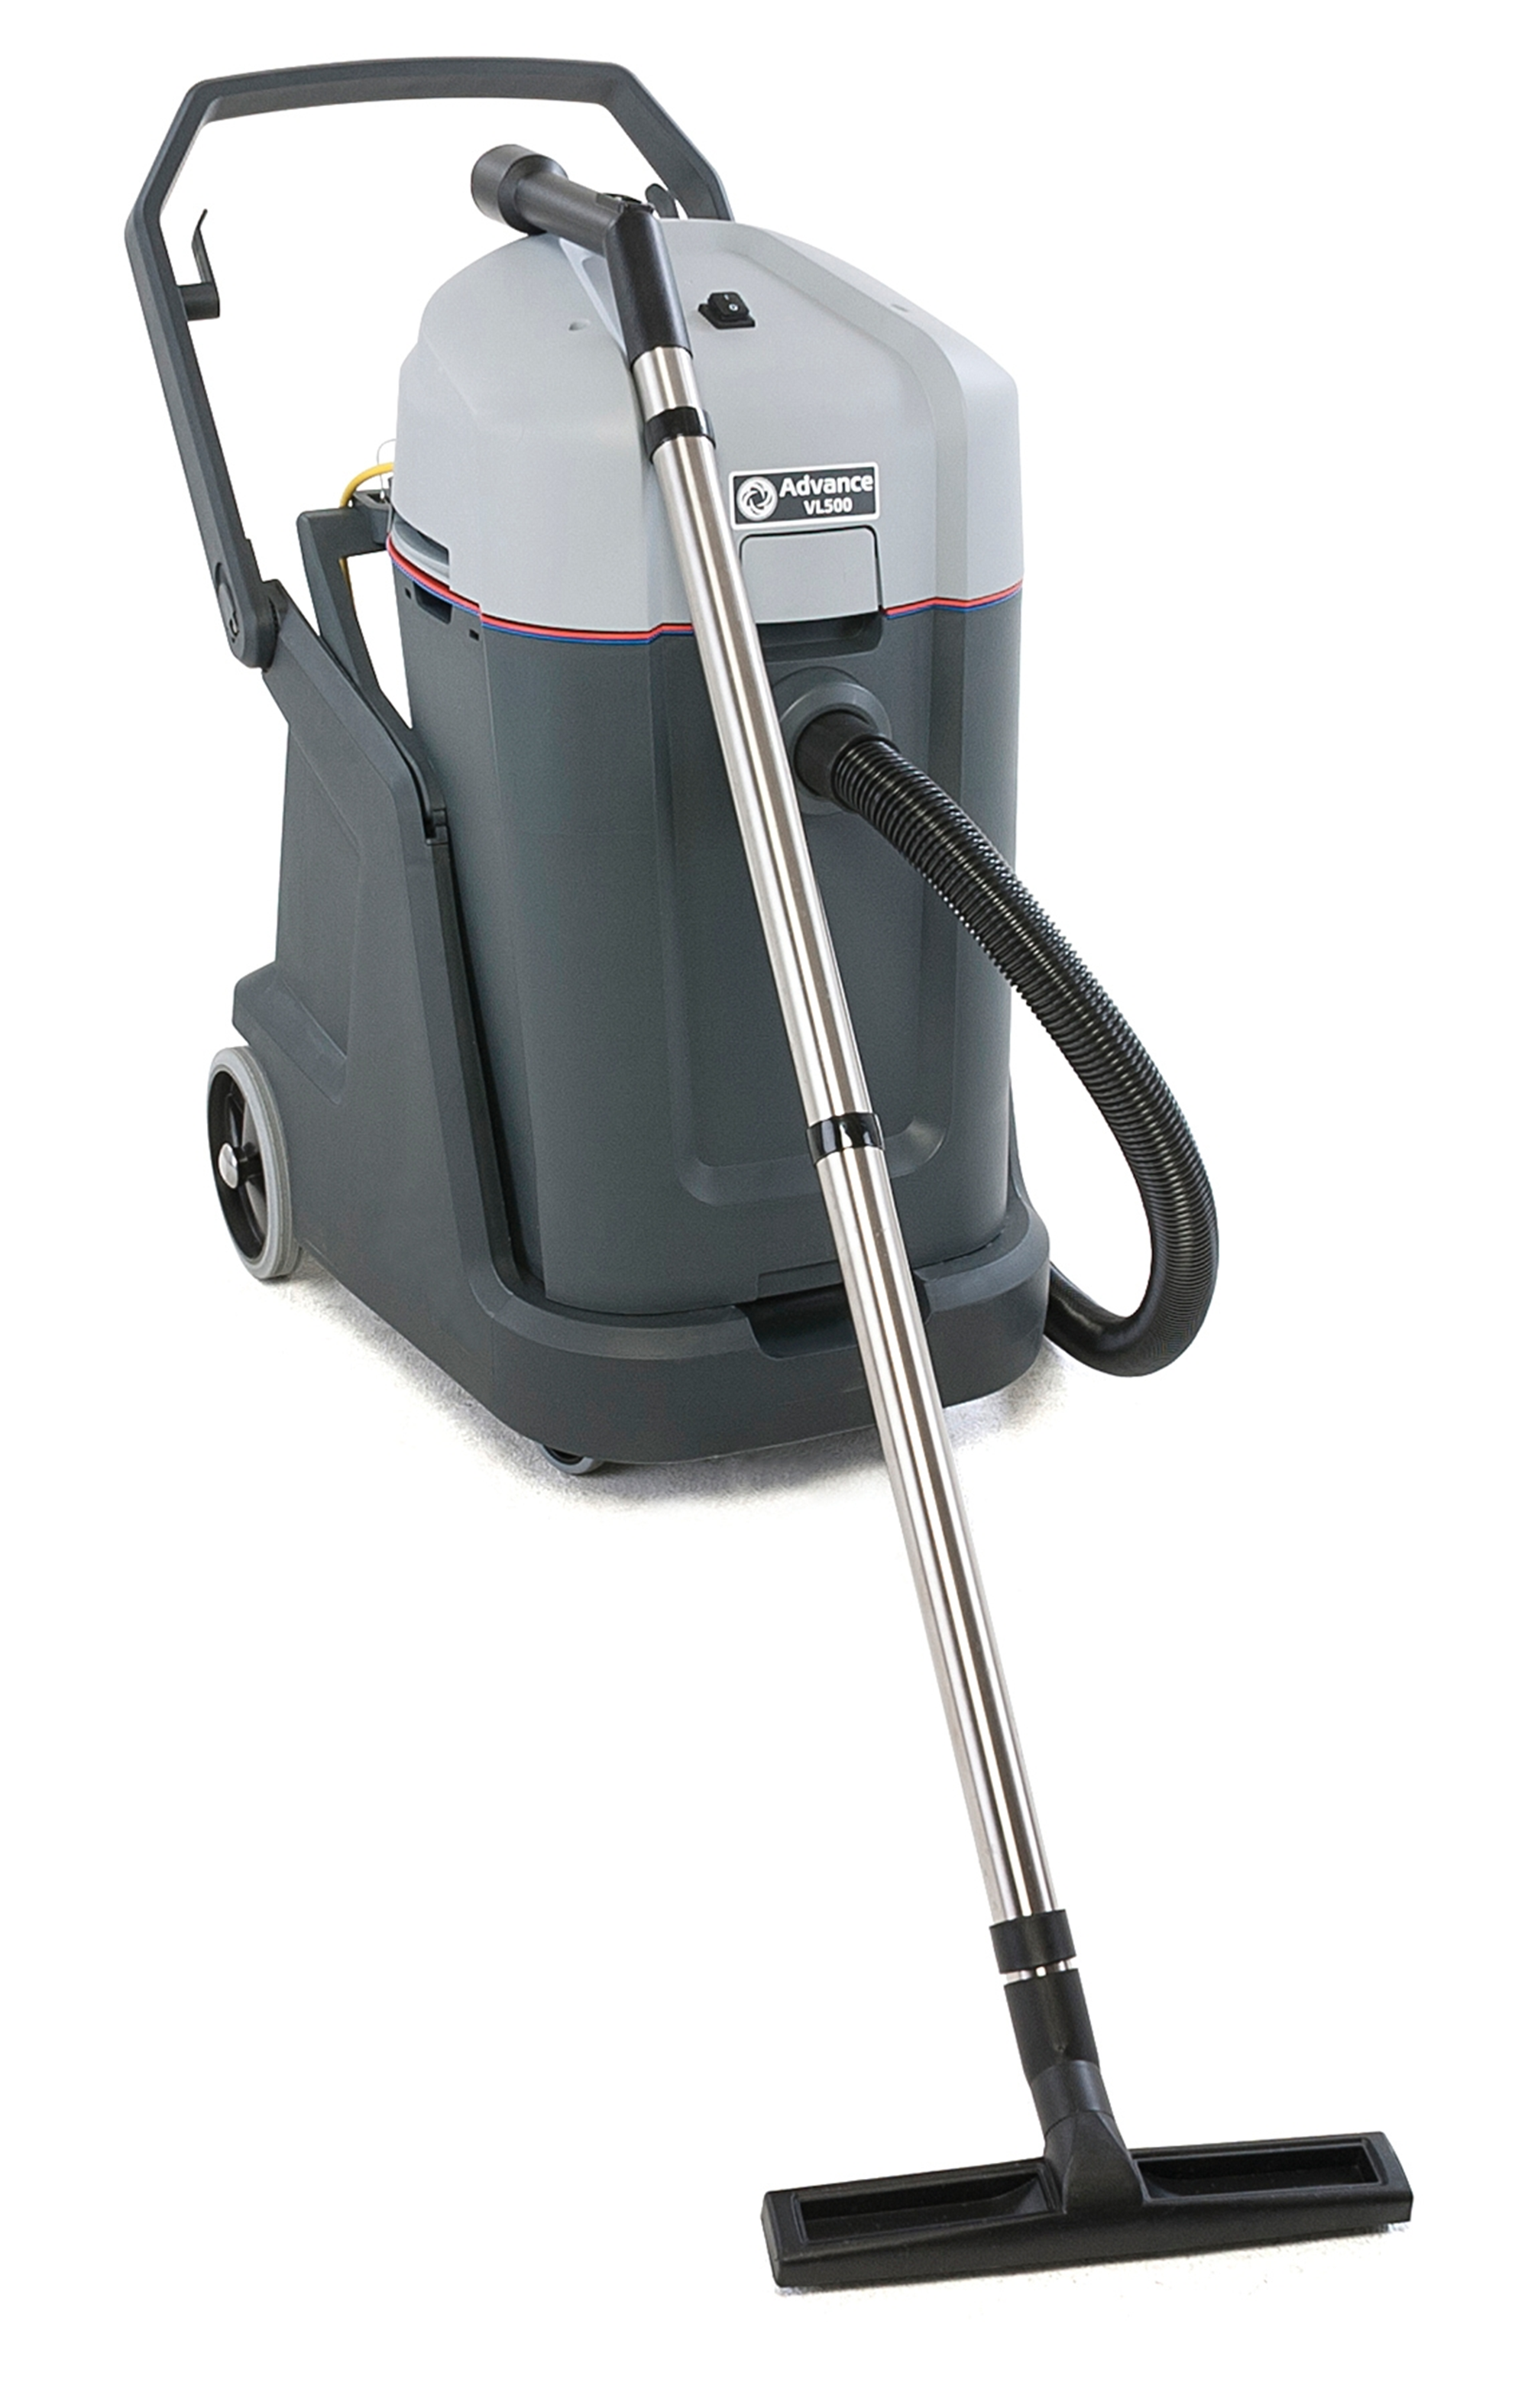 Nilfisk VL500 Wet Dry vacuum Nilfisk, VL500, Wet, Dry, vacuum, karcher, nt, 48/1, windsor, recover, 18, commercial,  vac, compact, ergonomic, powerful, 